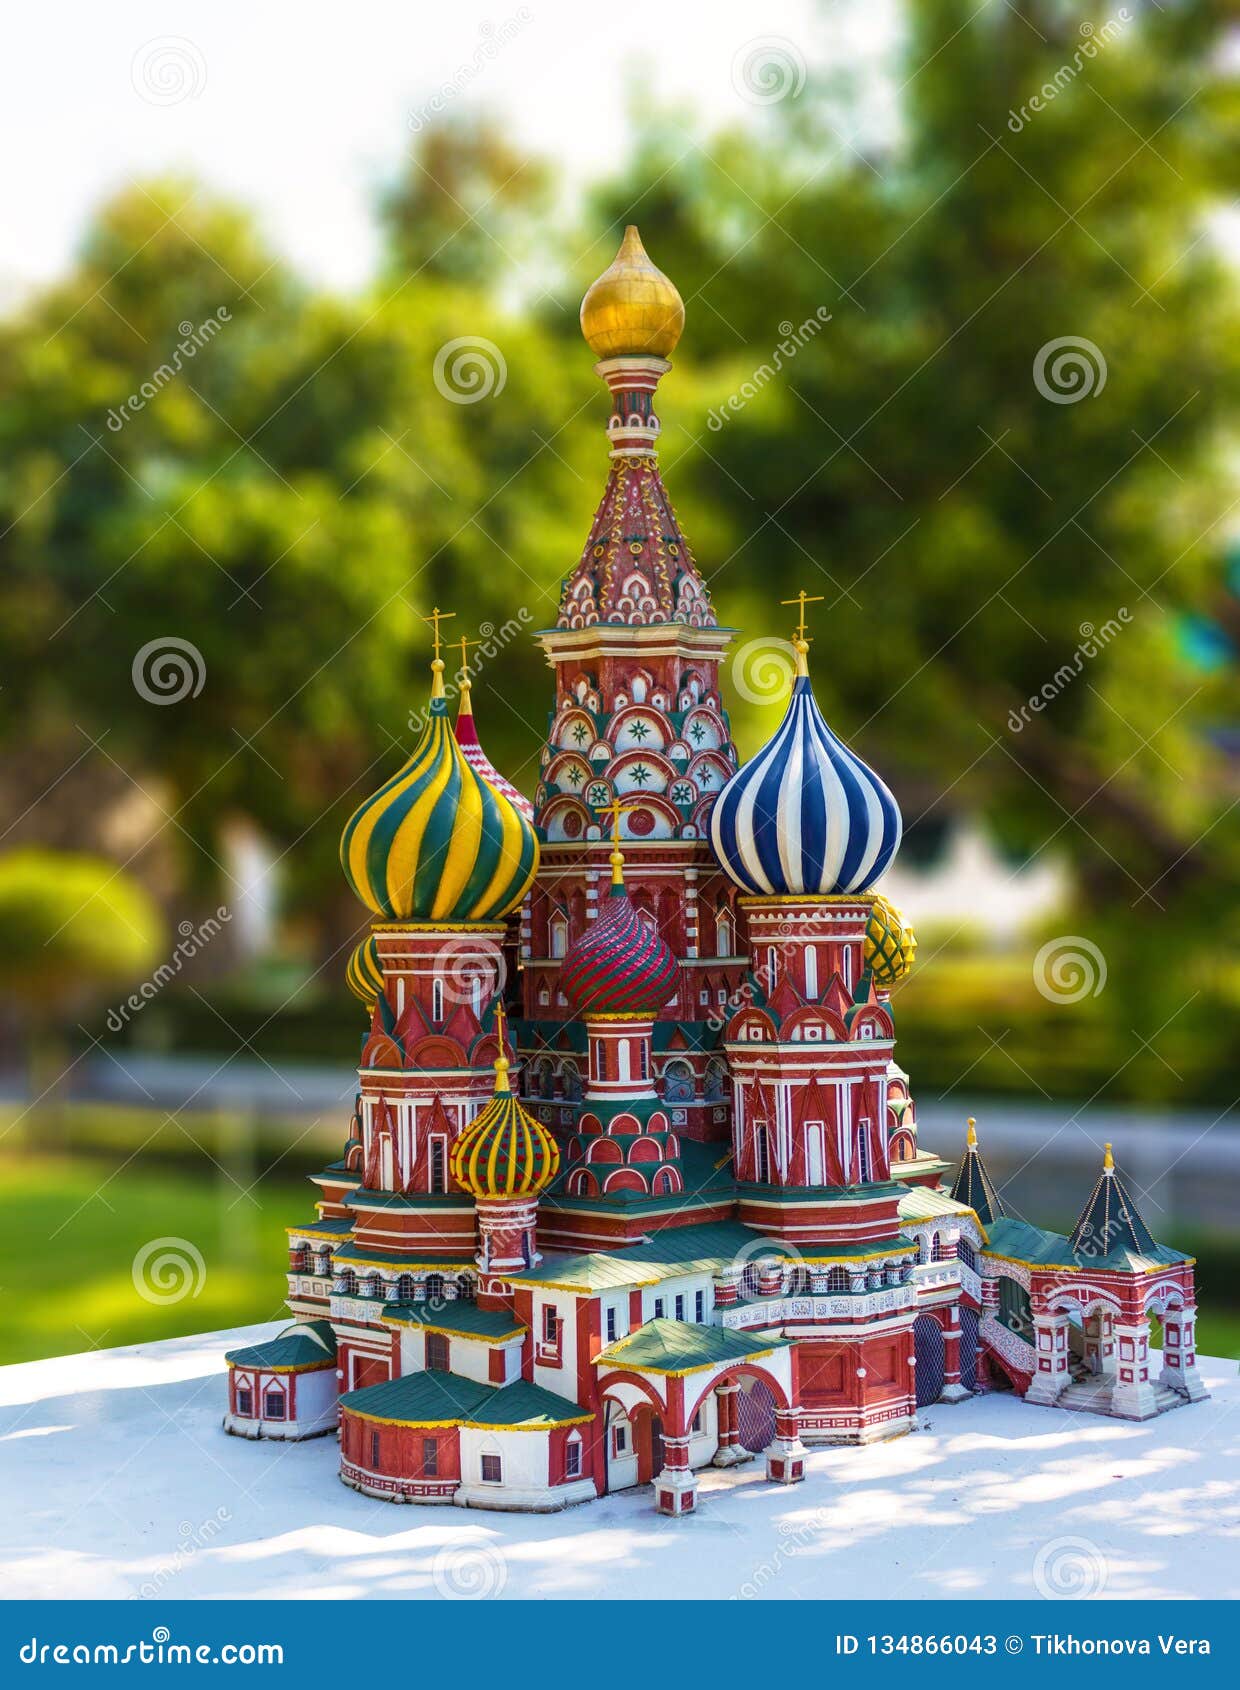 1 block Handmade in Clay Moscow 3.15X2.15X3.15 high Red Square Saint Basils Cathedral Russian Nativity Scene 